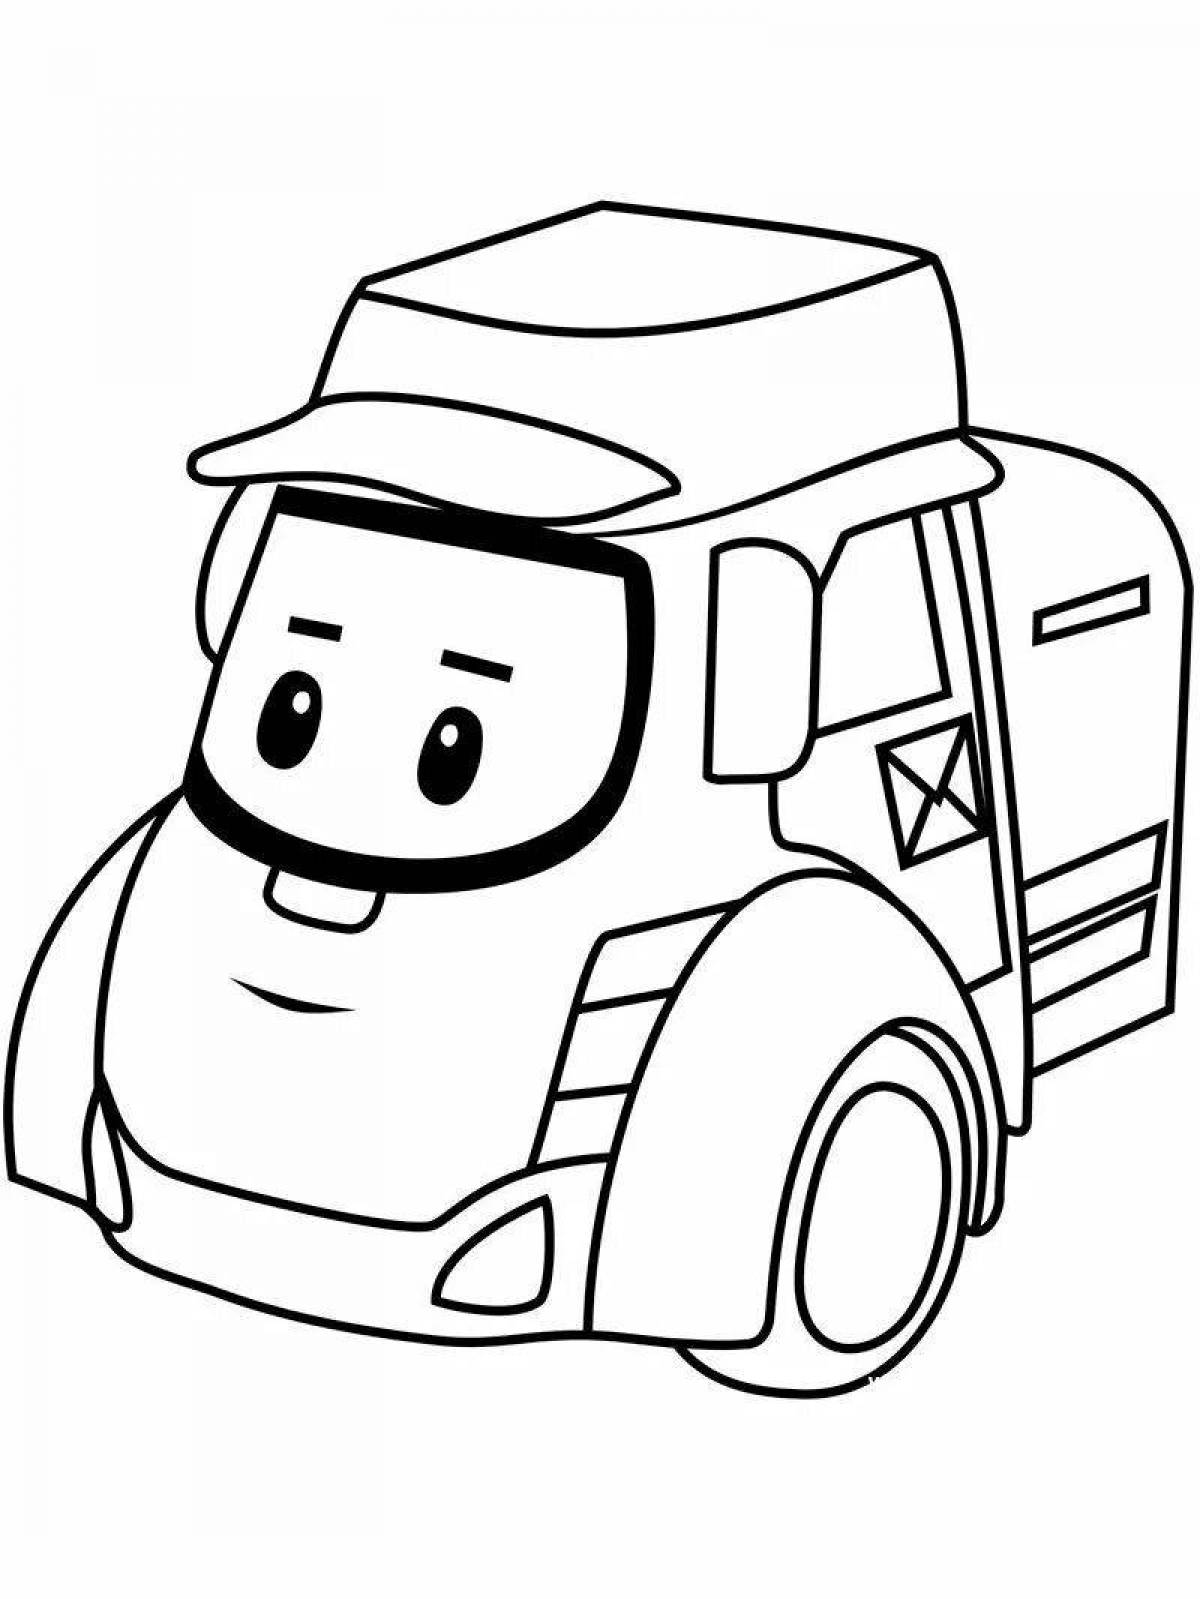 Majestic left truck coloring page